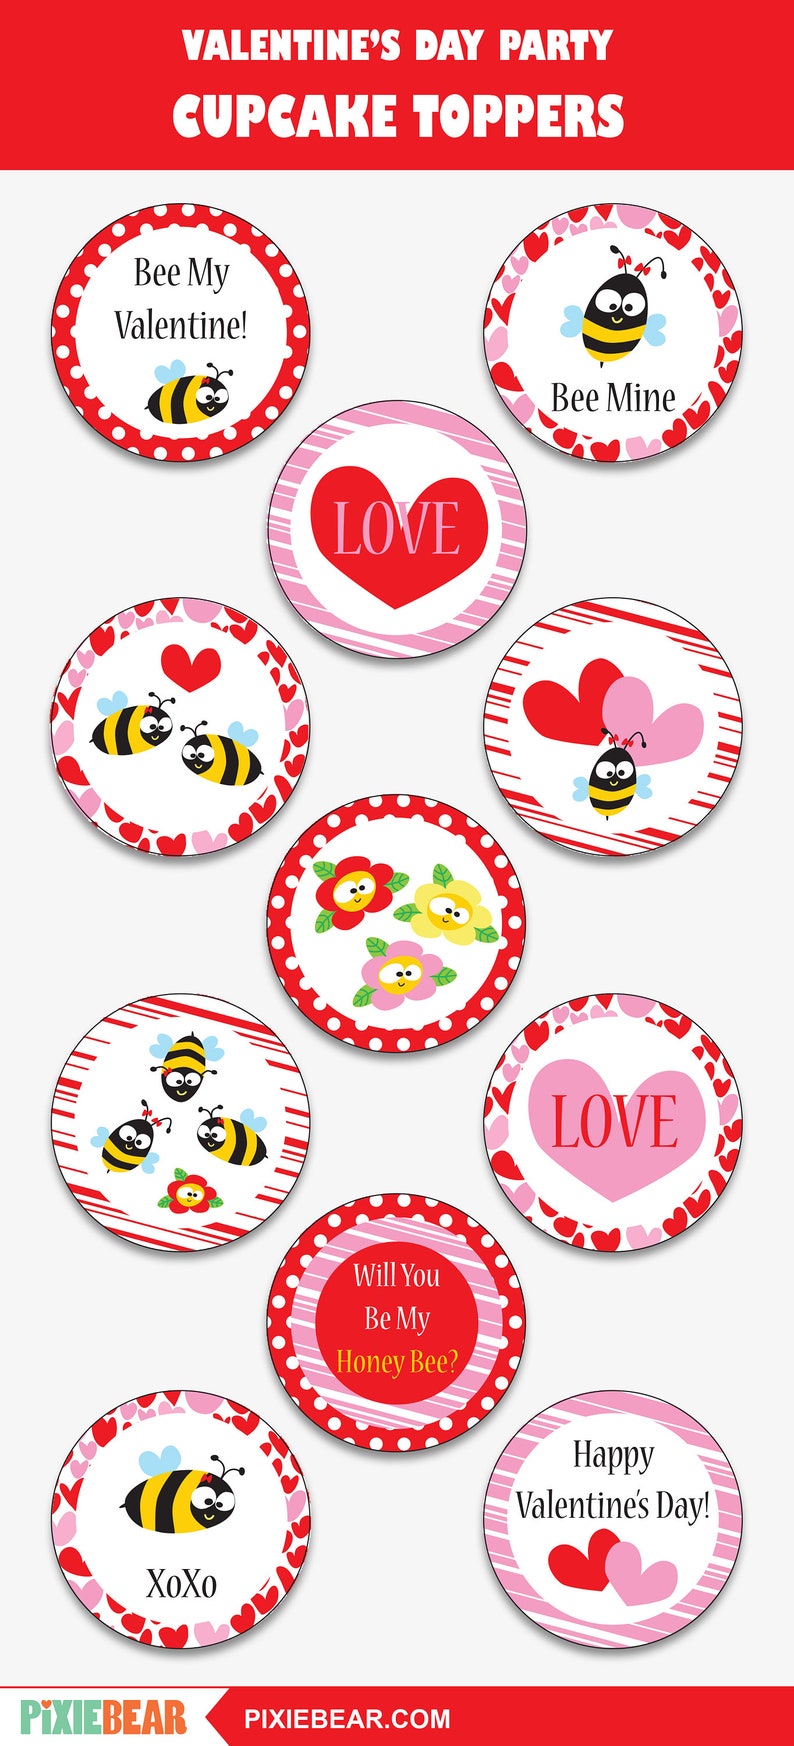 Valentines Day Cupcake Toppers Valentine's Day Party Valentines Day Birthday Personalized Valentine Printables Instant Download image 6